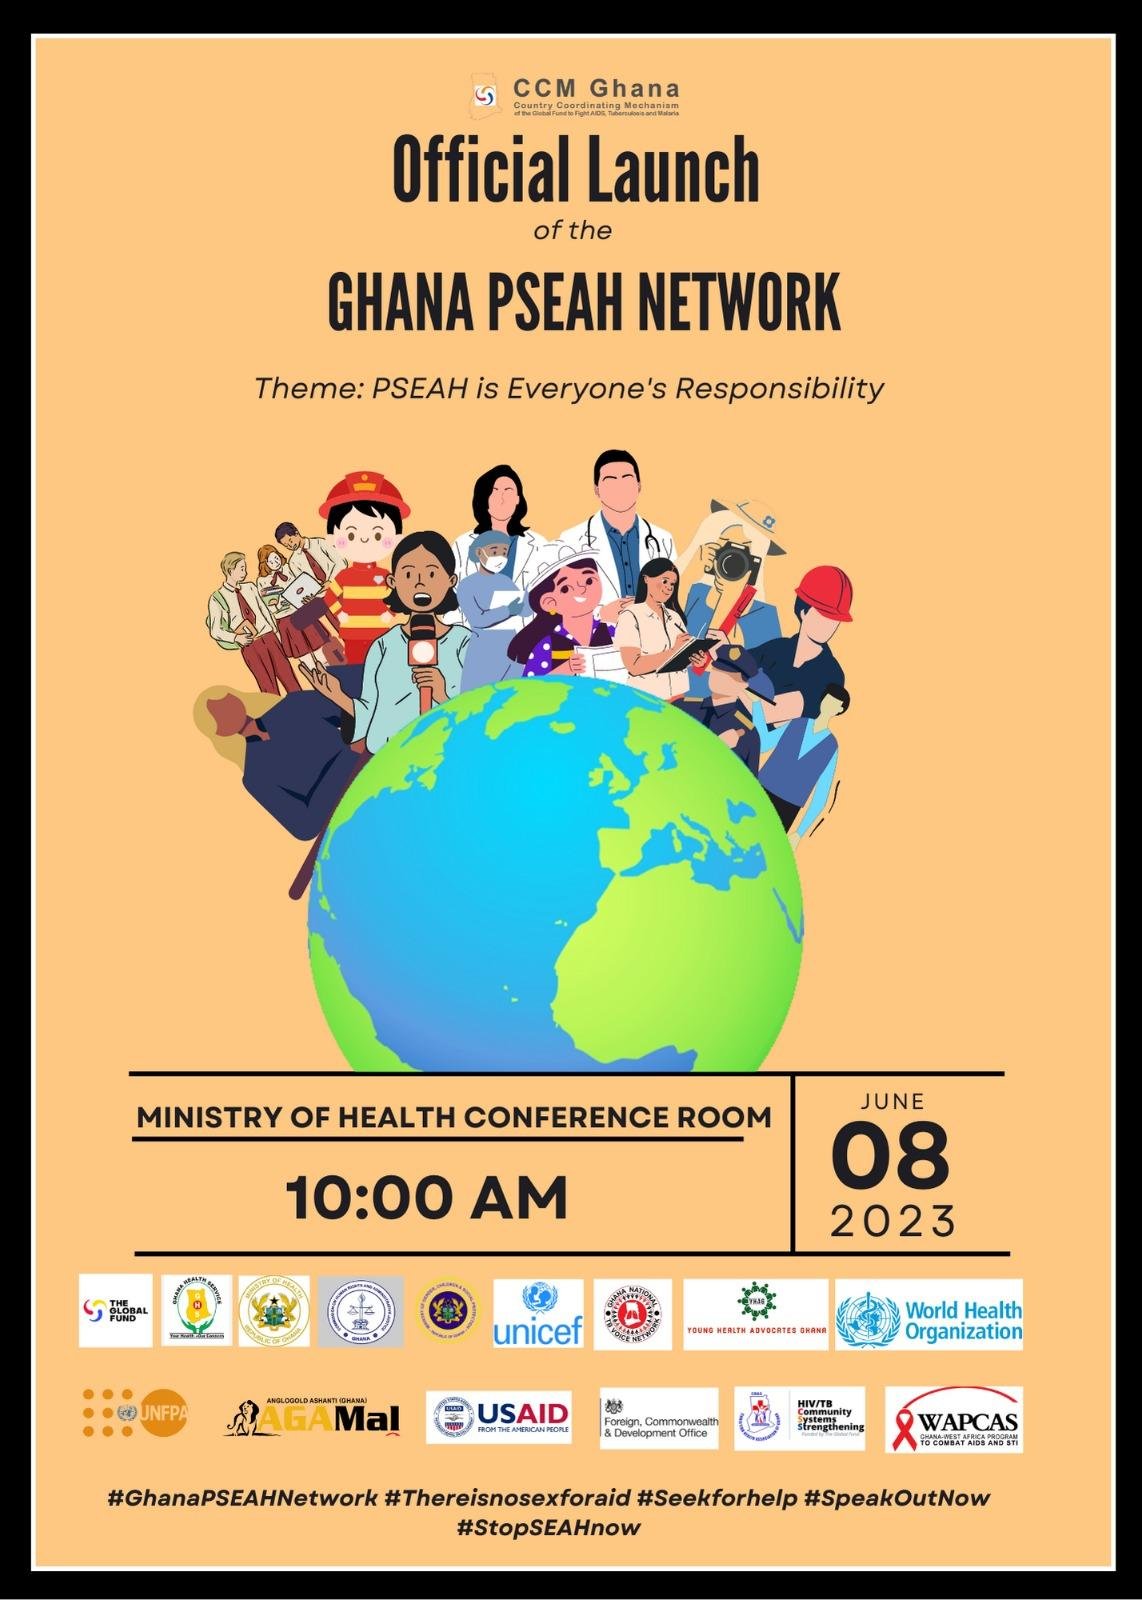 Official Launch of the Ghana PSEAH Network